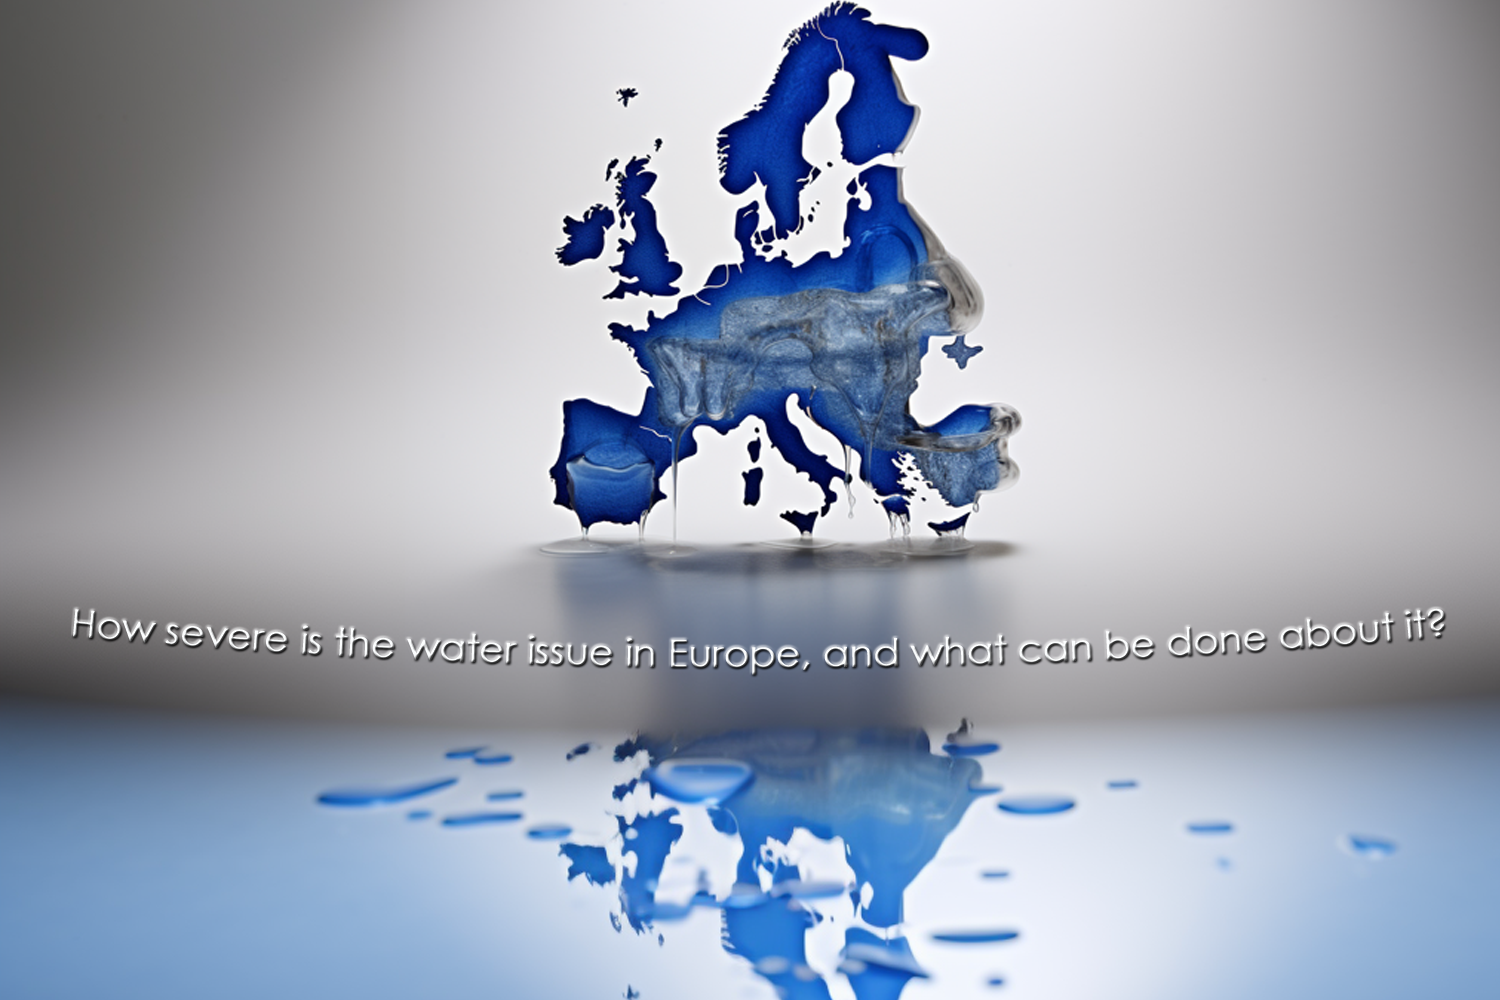 How severe is the water issue in Europe, and what can be done about it?